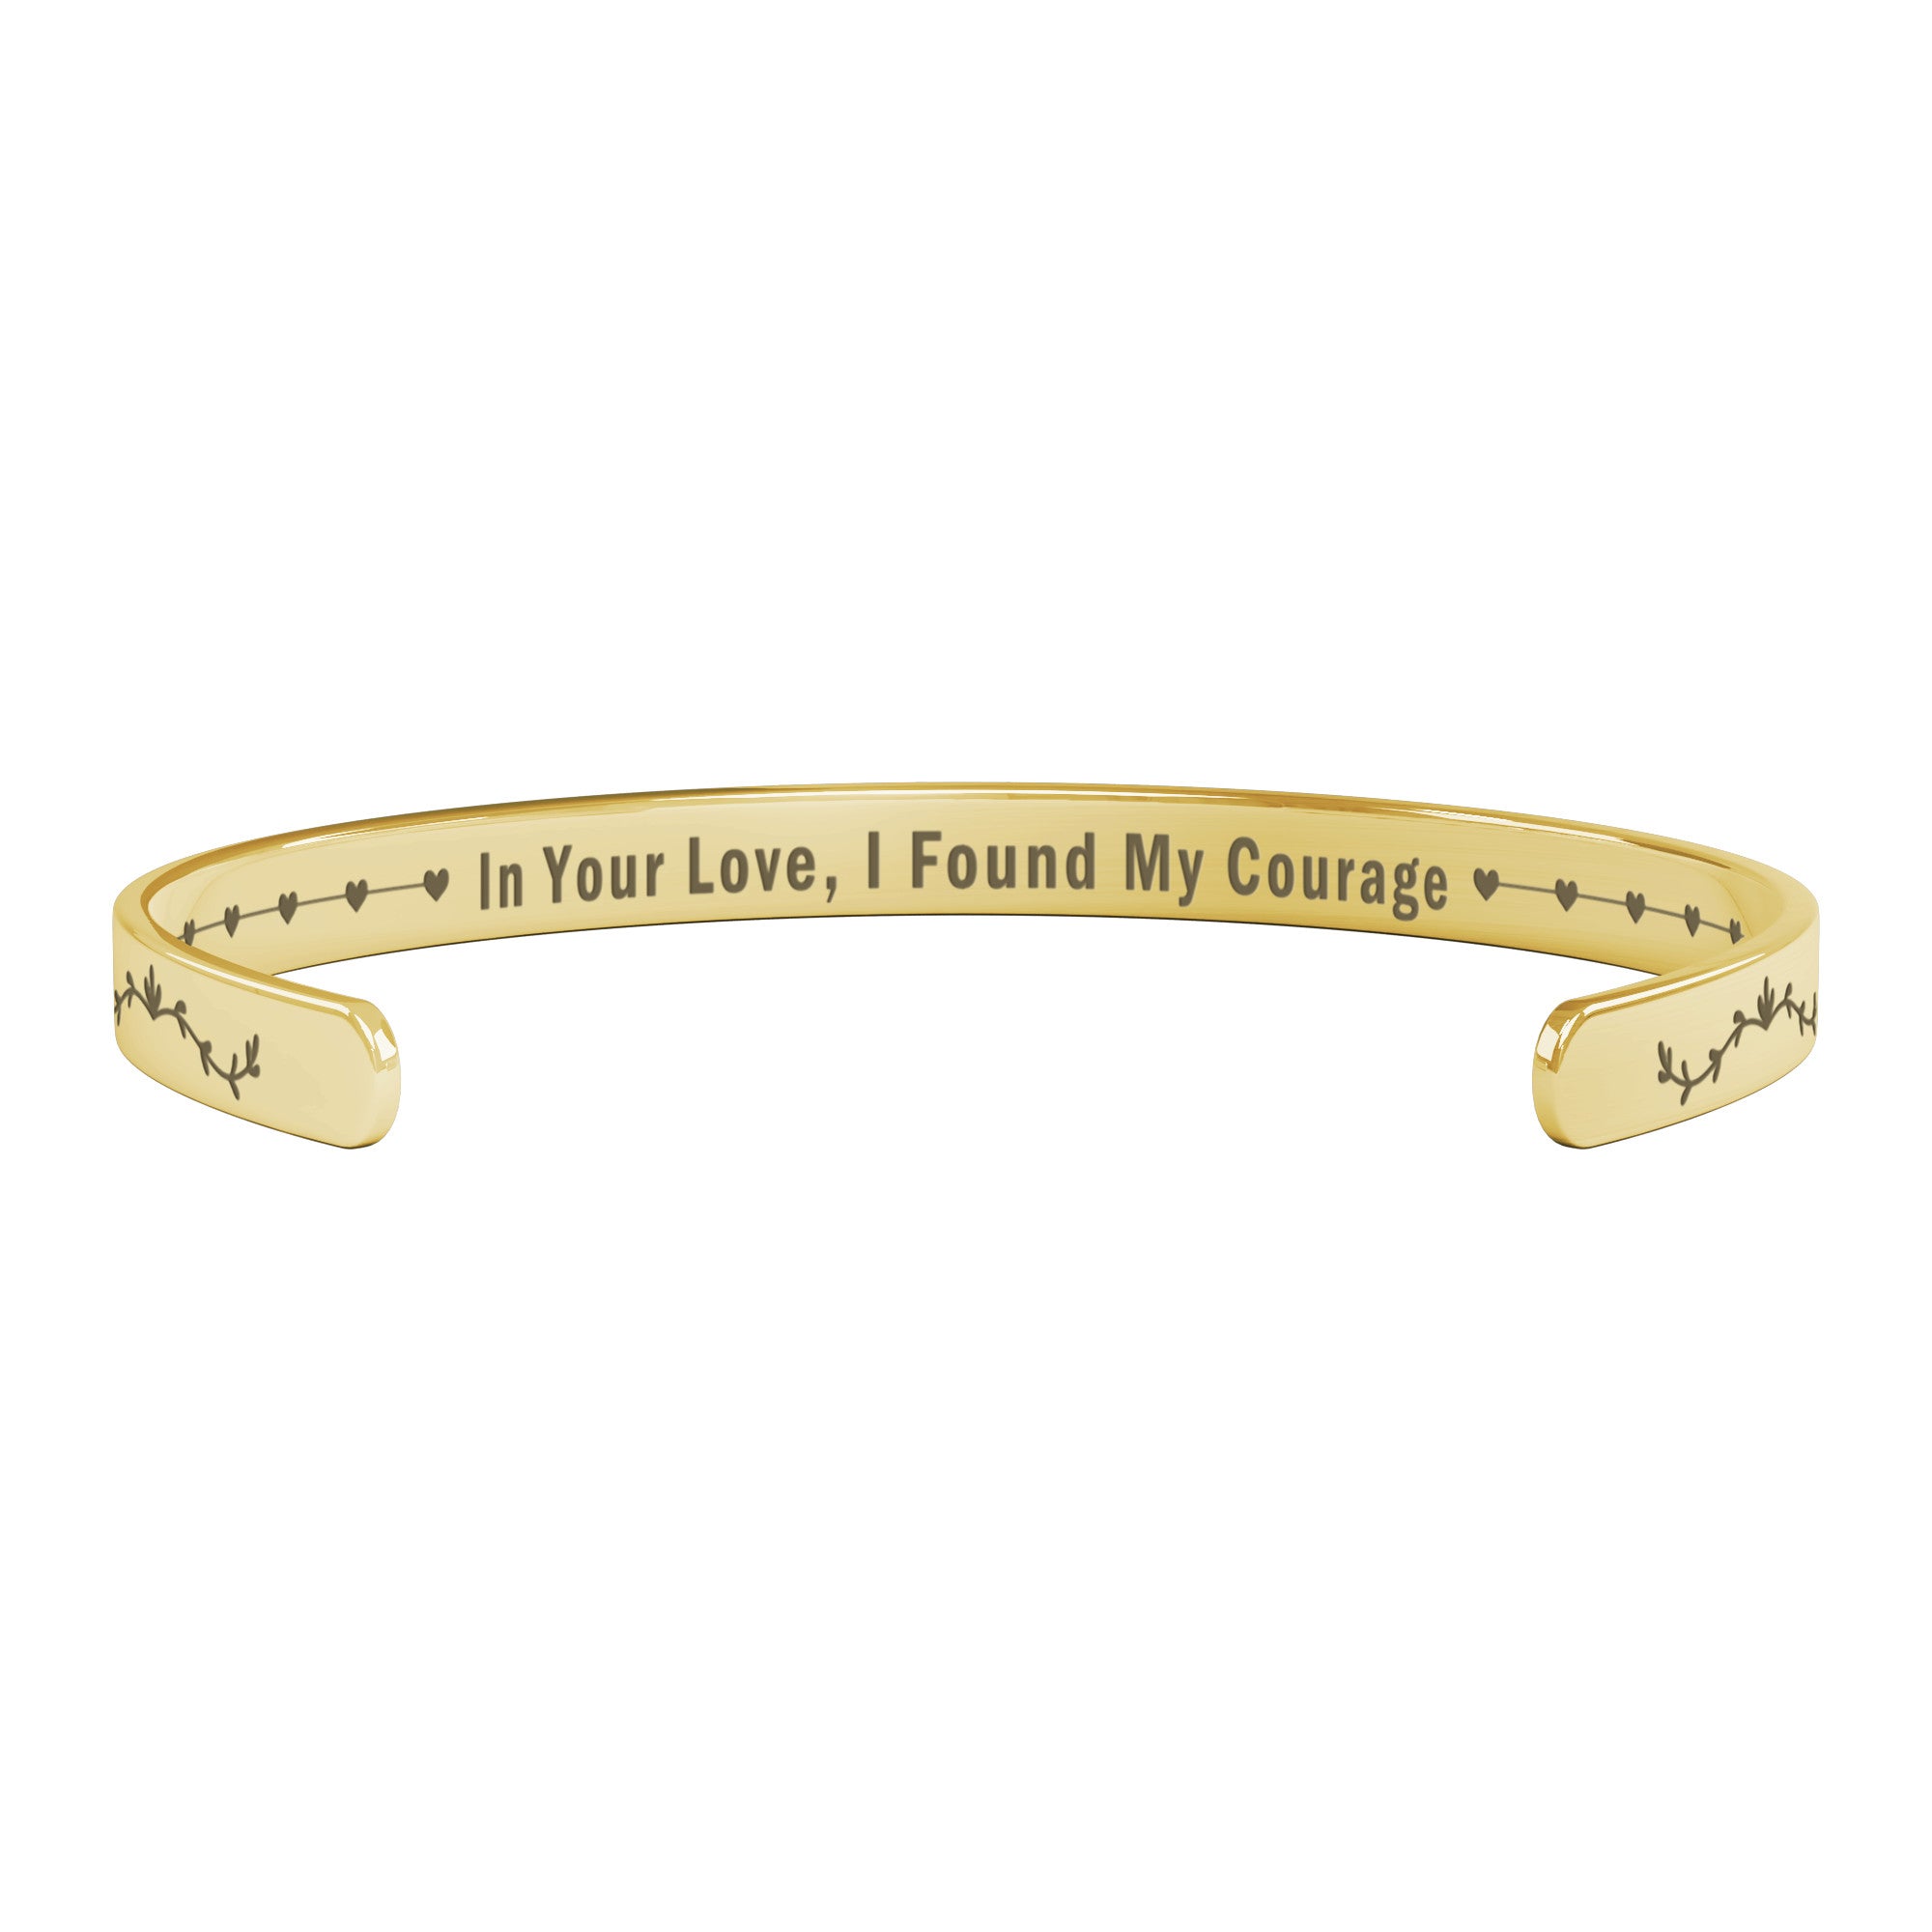 Through Duty and Love, We Stand Strong Cuff Bracelet